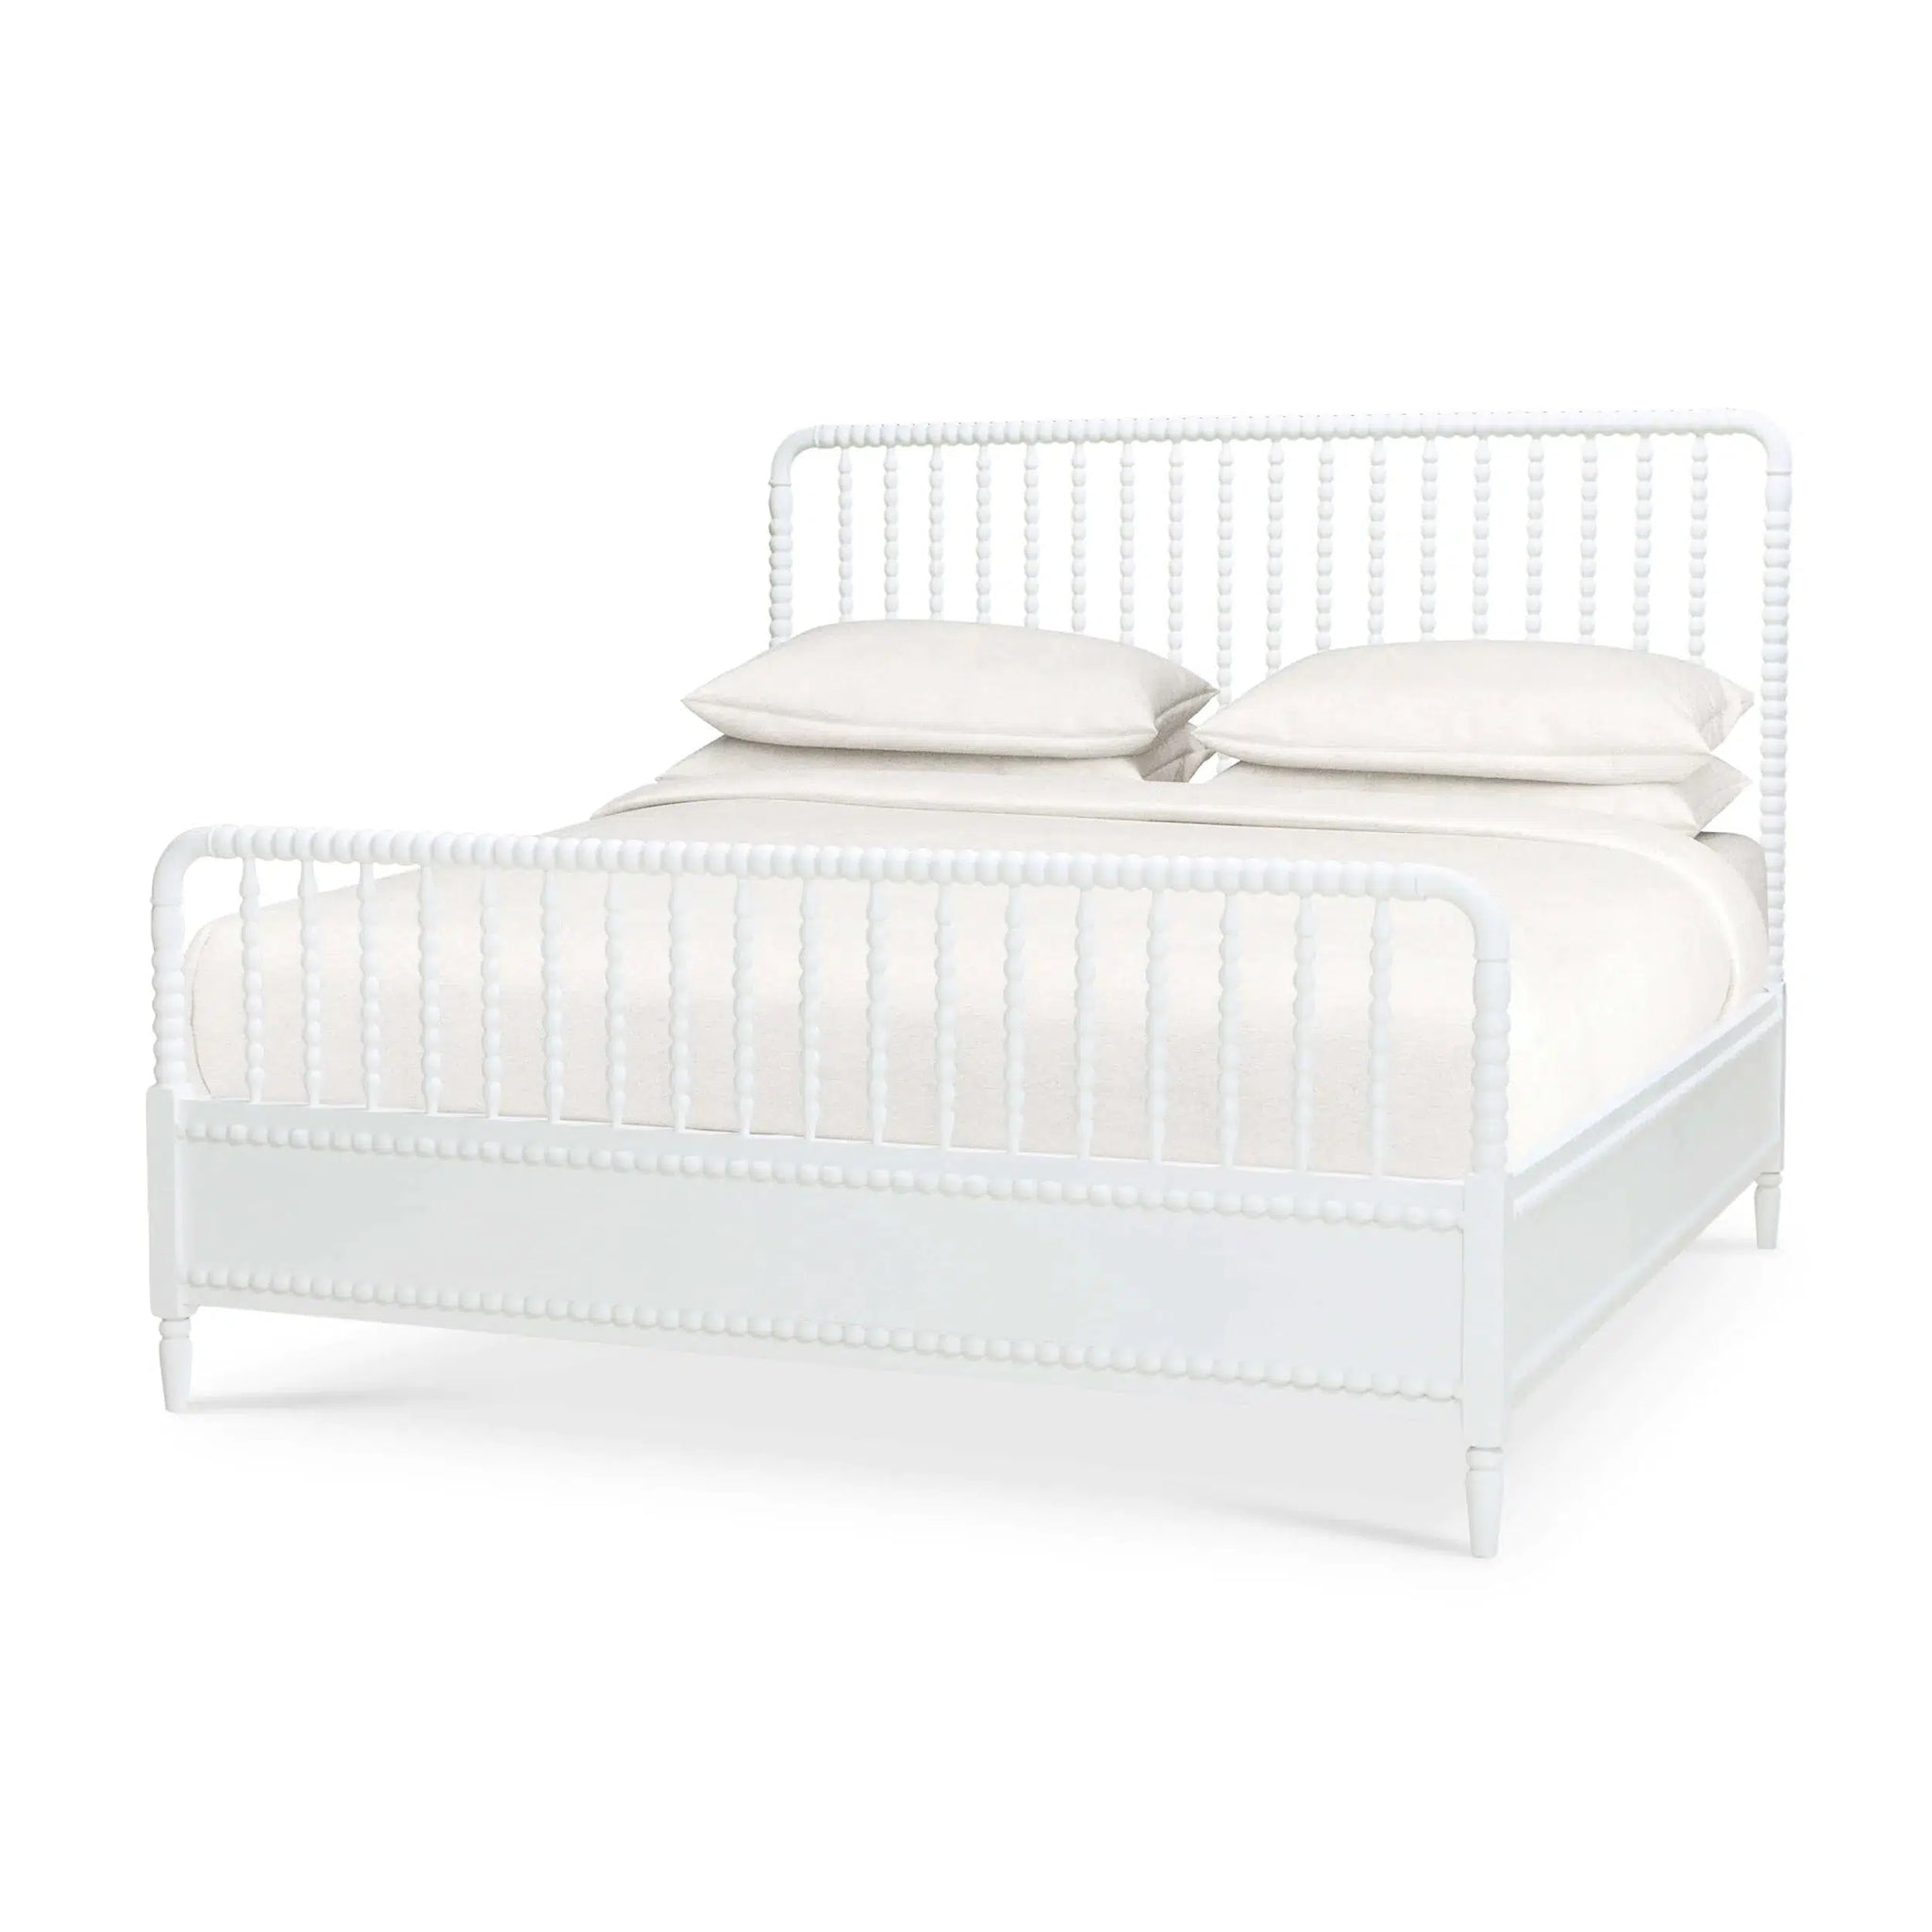 Cholet Bed King In Architectural White-Blue Hand Home